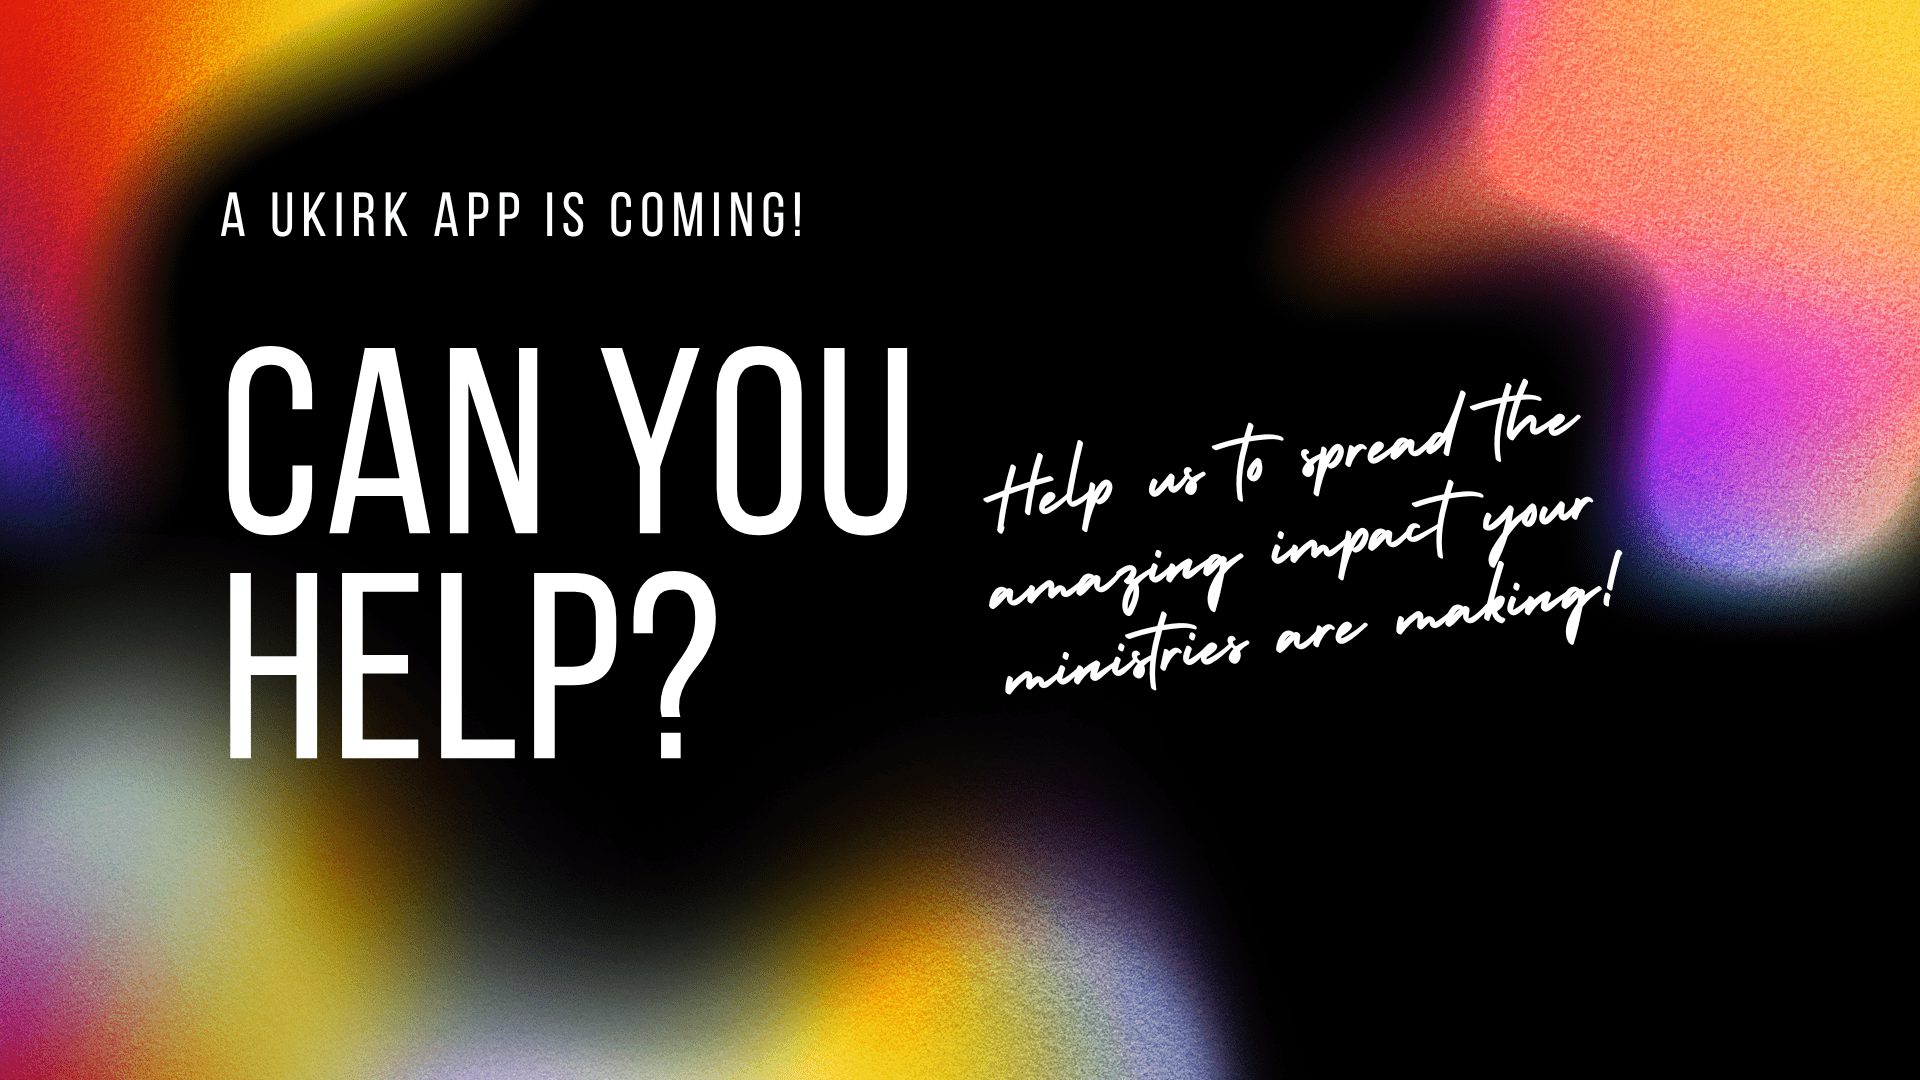 We Need Your Assistance for our New App